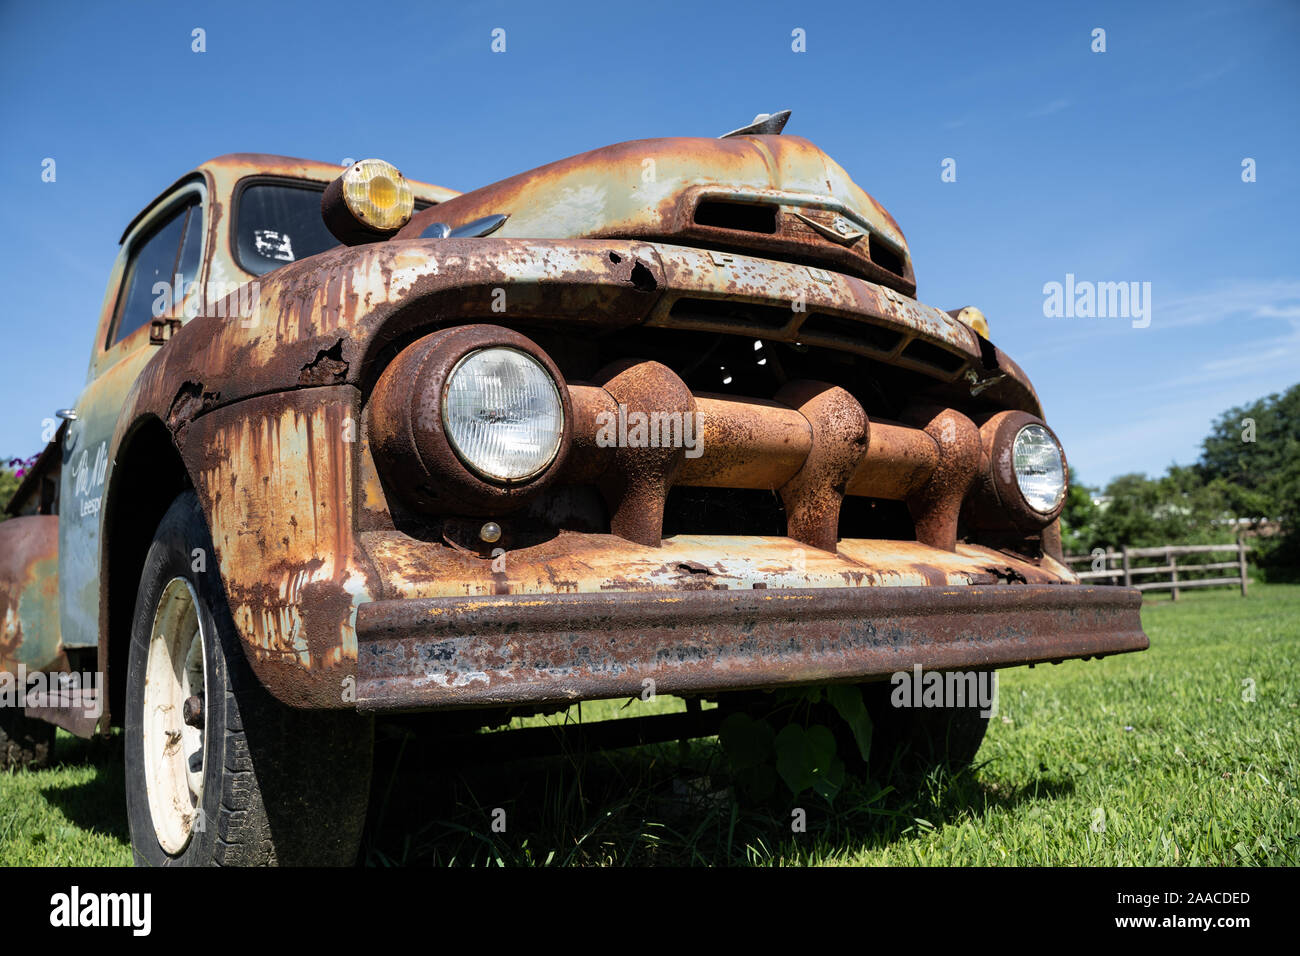 Old ford truck, blue sky background, August 10, 2019, Leesport, Pennsylvania, USA Stock Photo